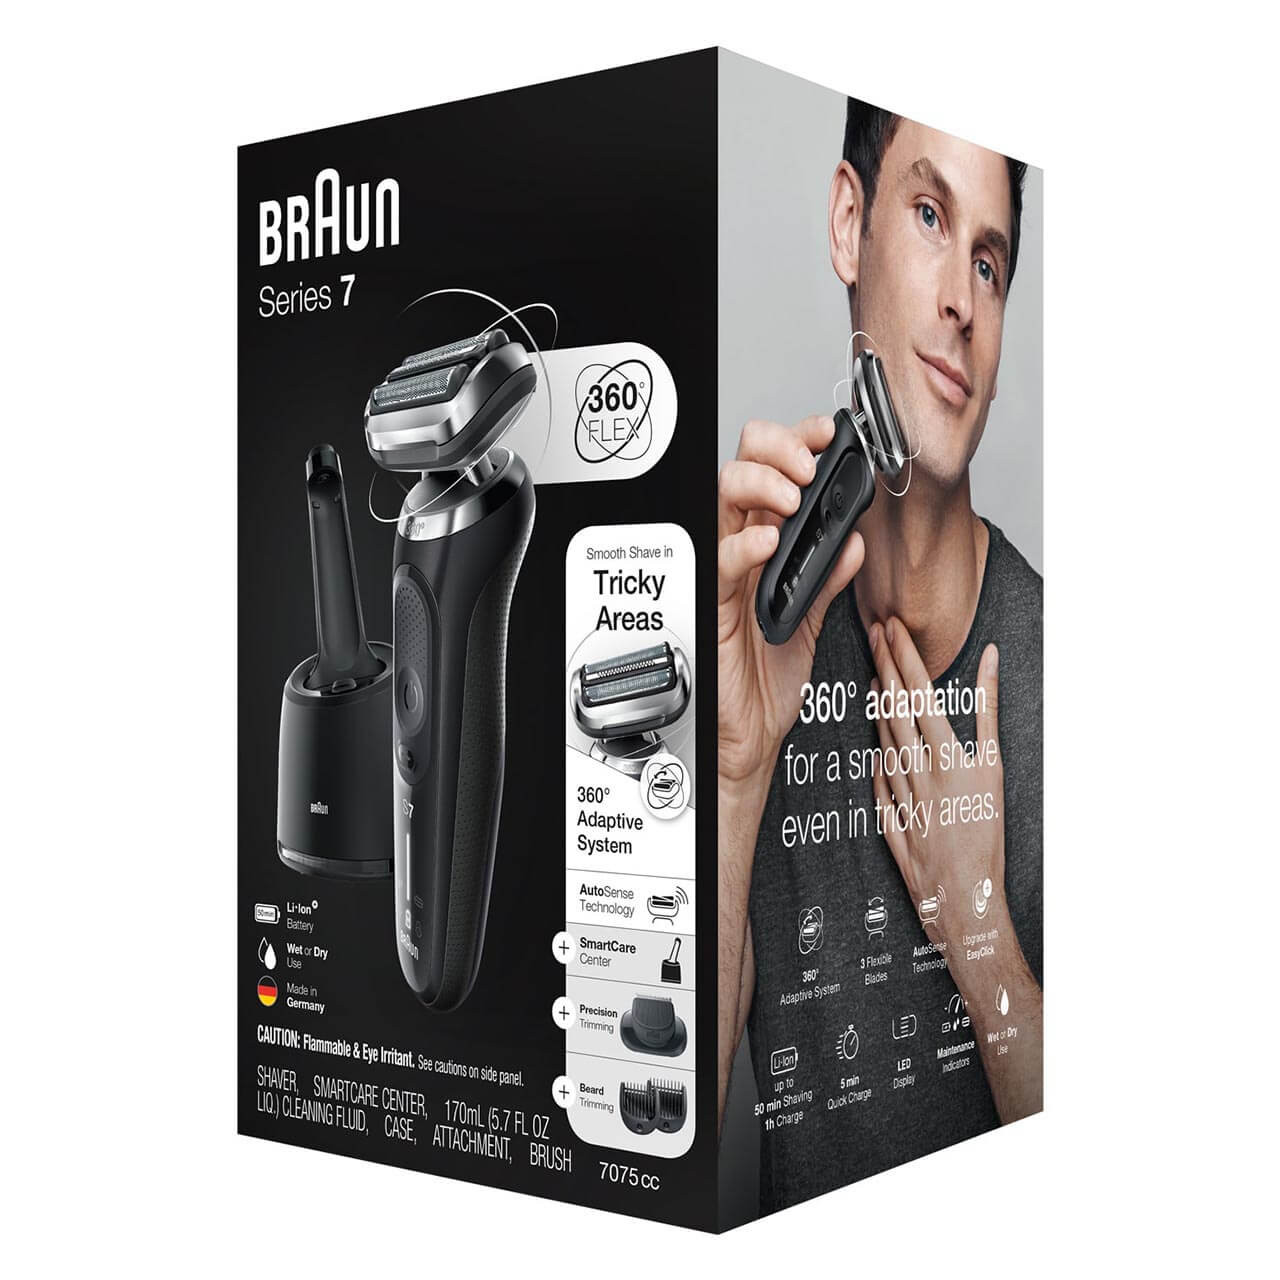 Braun Series 7 7071cc Review: Is It Worth The Hype? • ShaverCheck